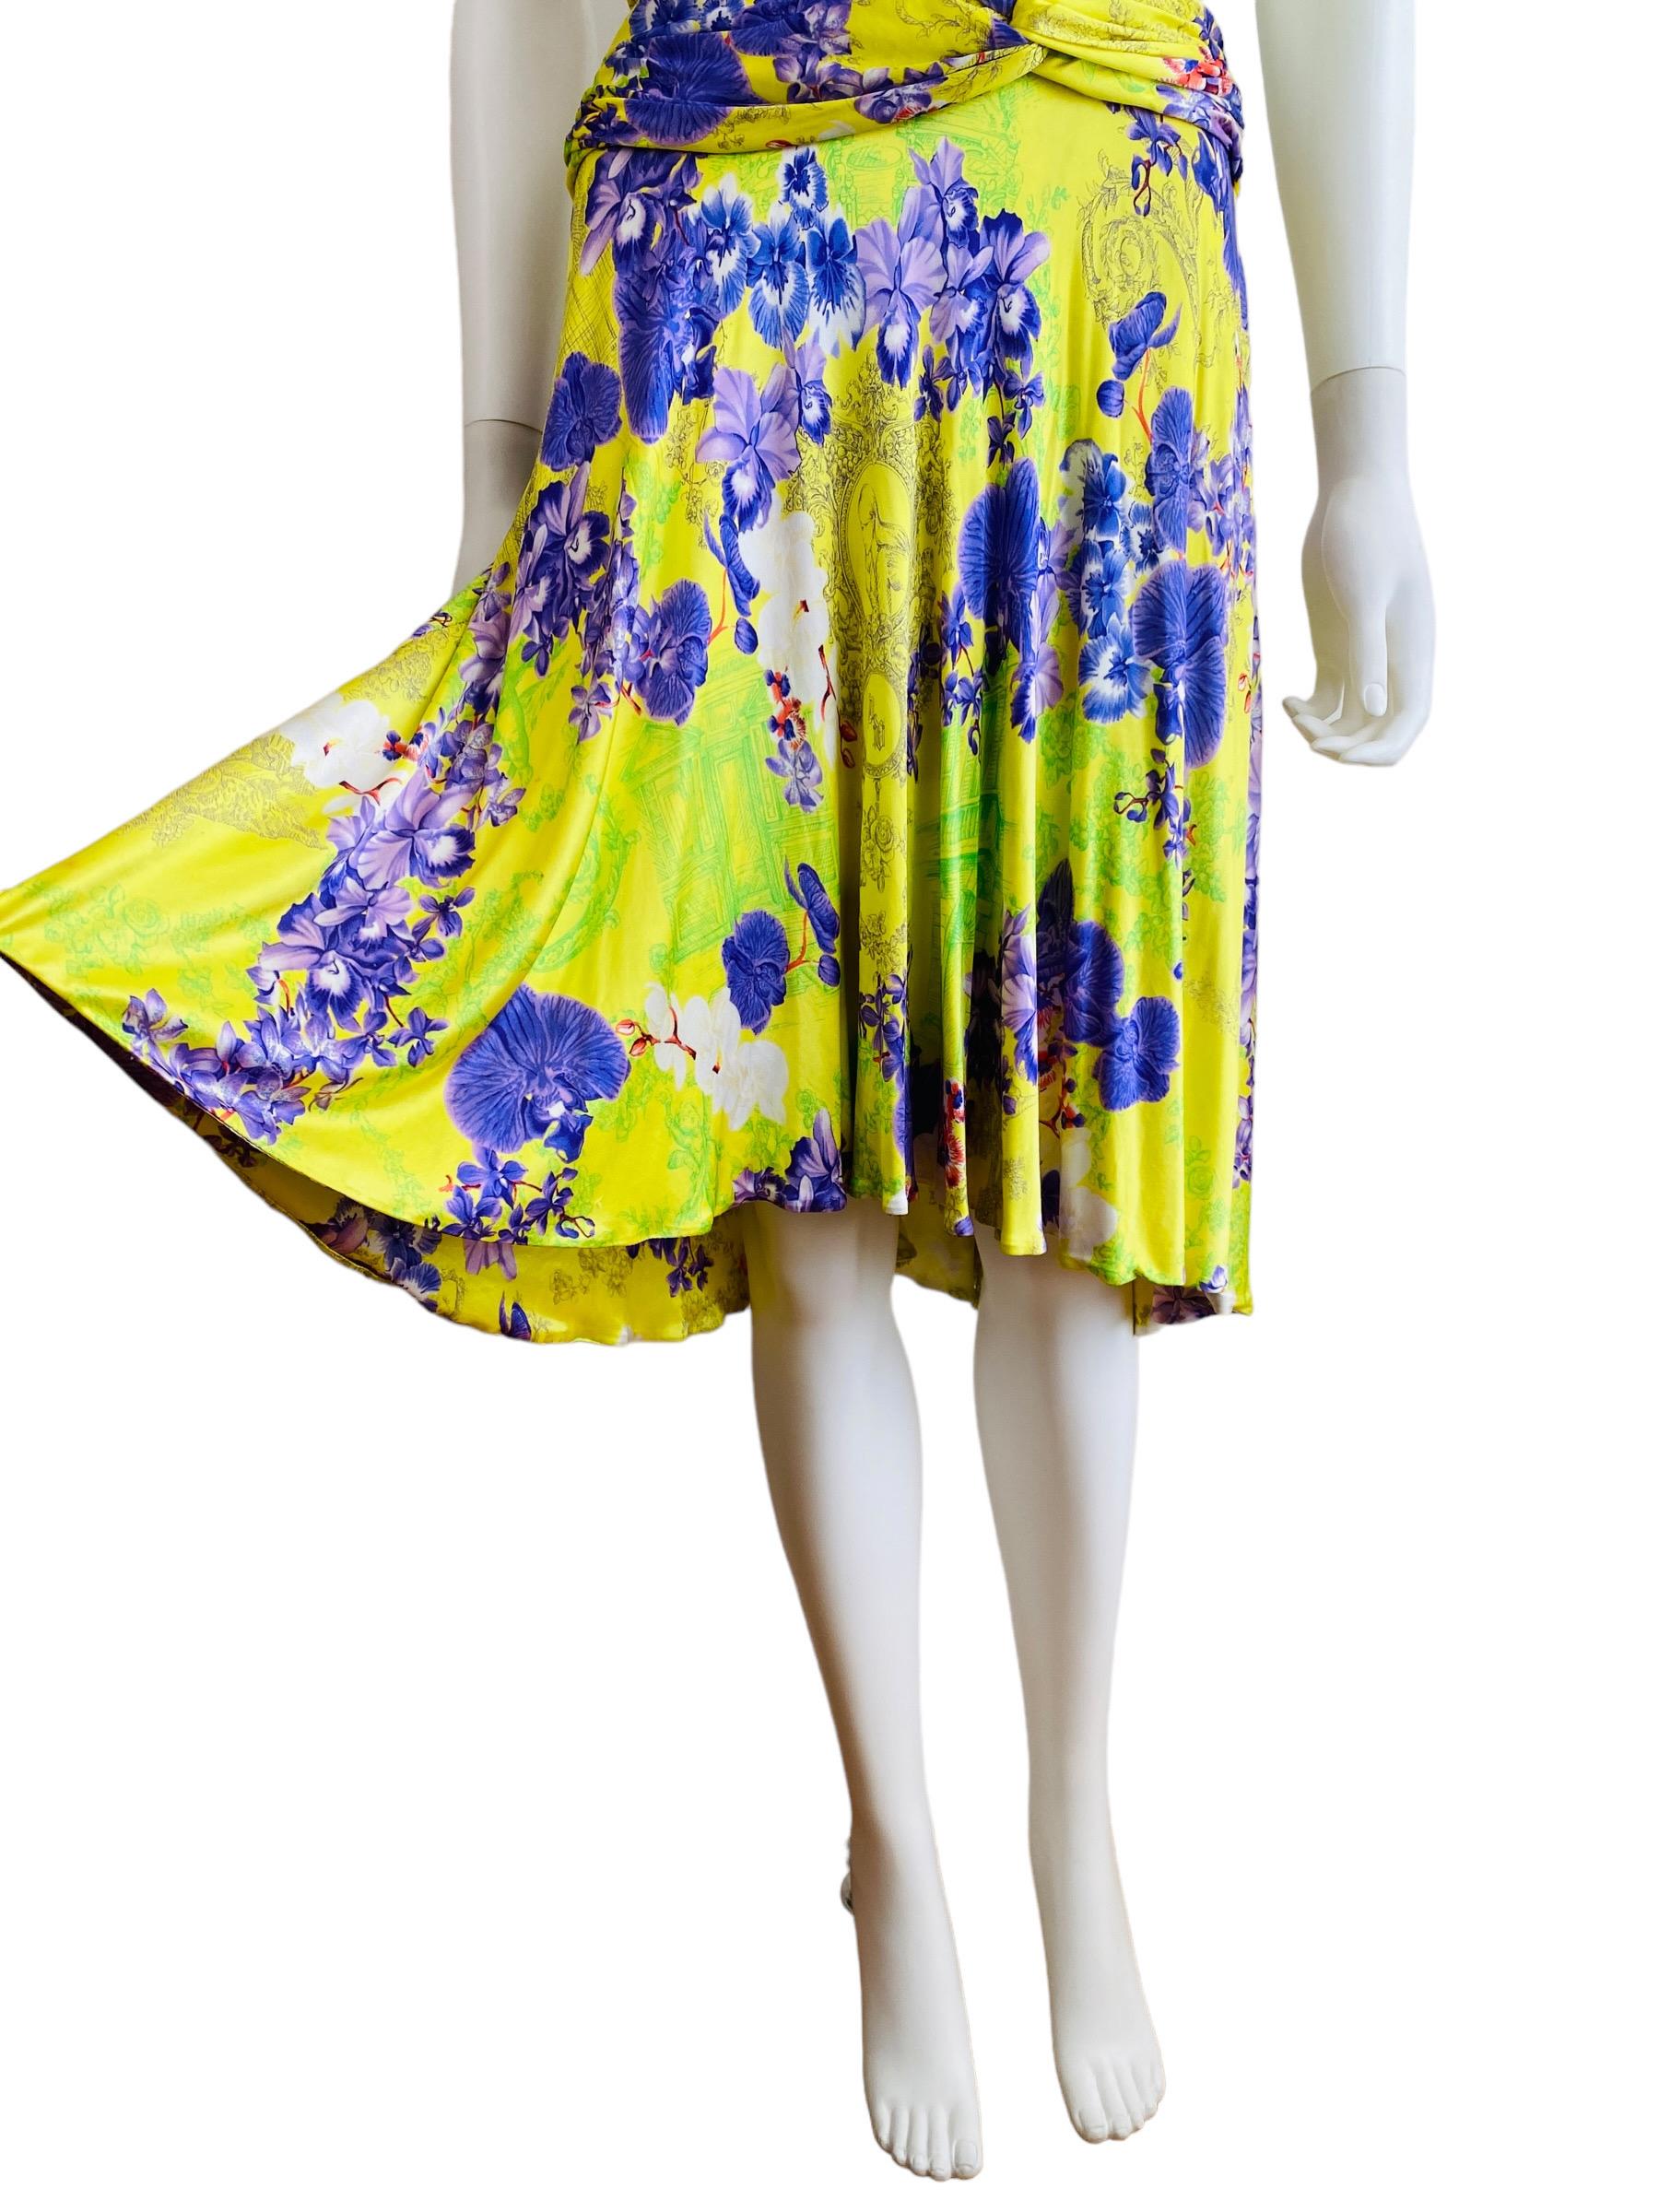 Vintage S/S 2004 Versace Dress Bright Yellow + Purple Orchid Floral Runway For Sale 5